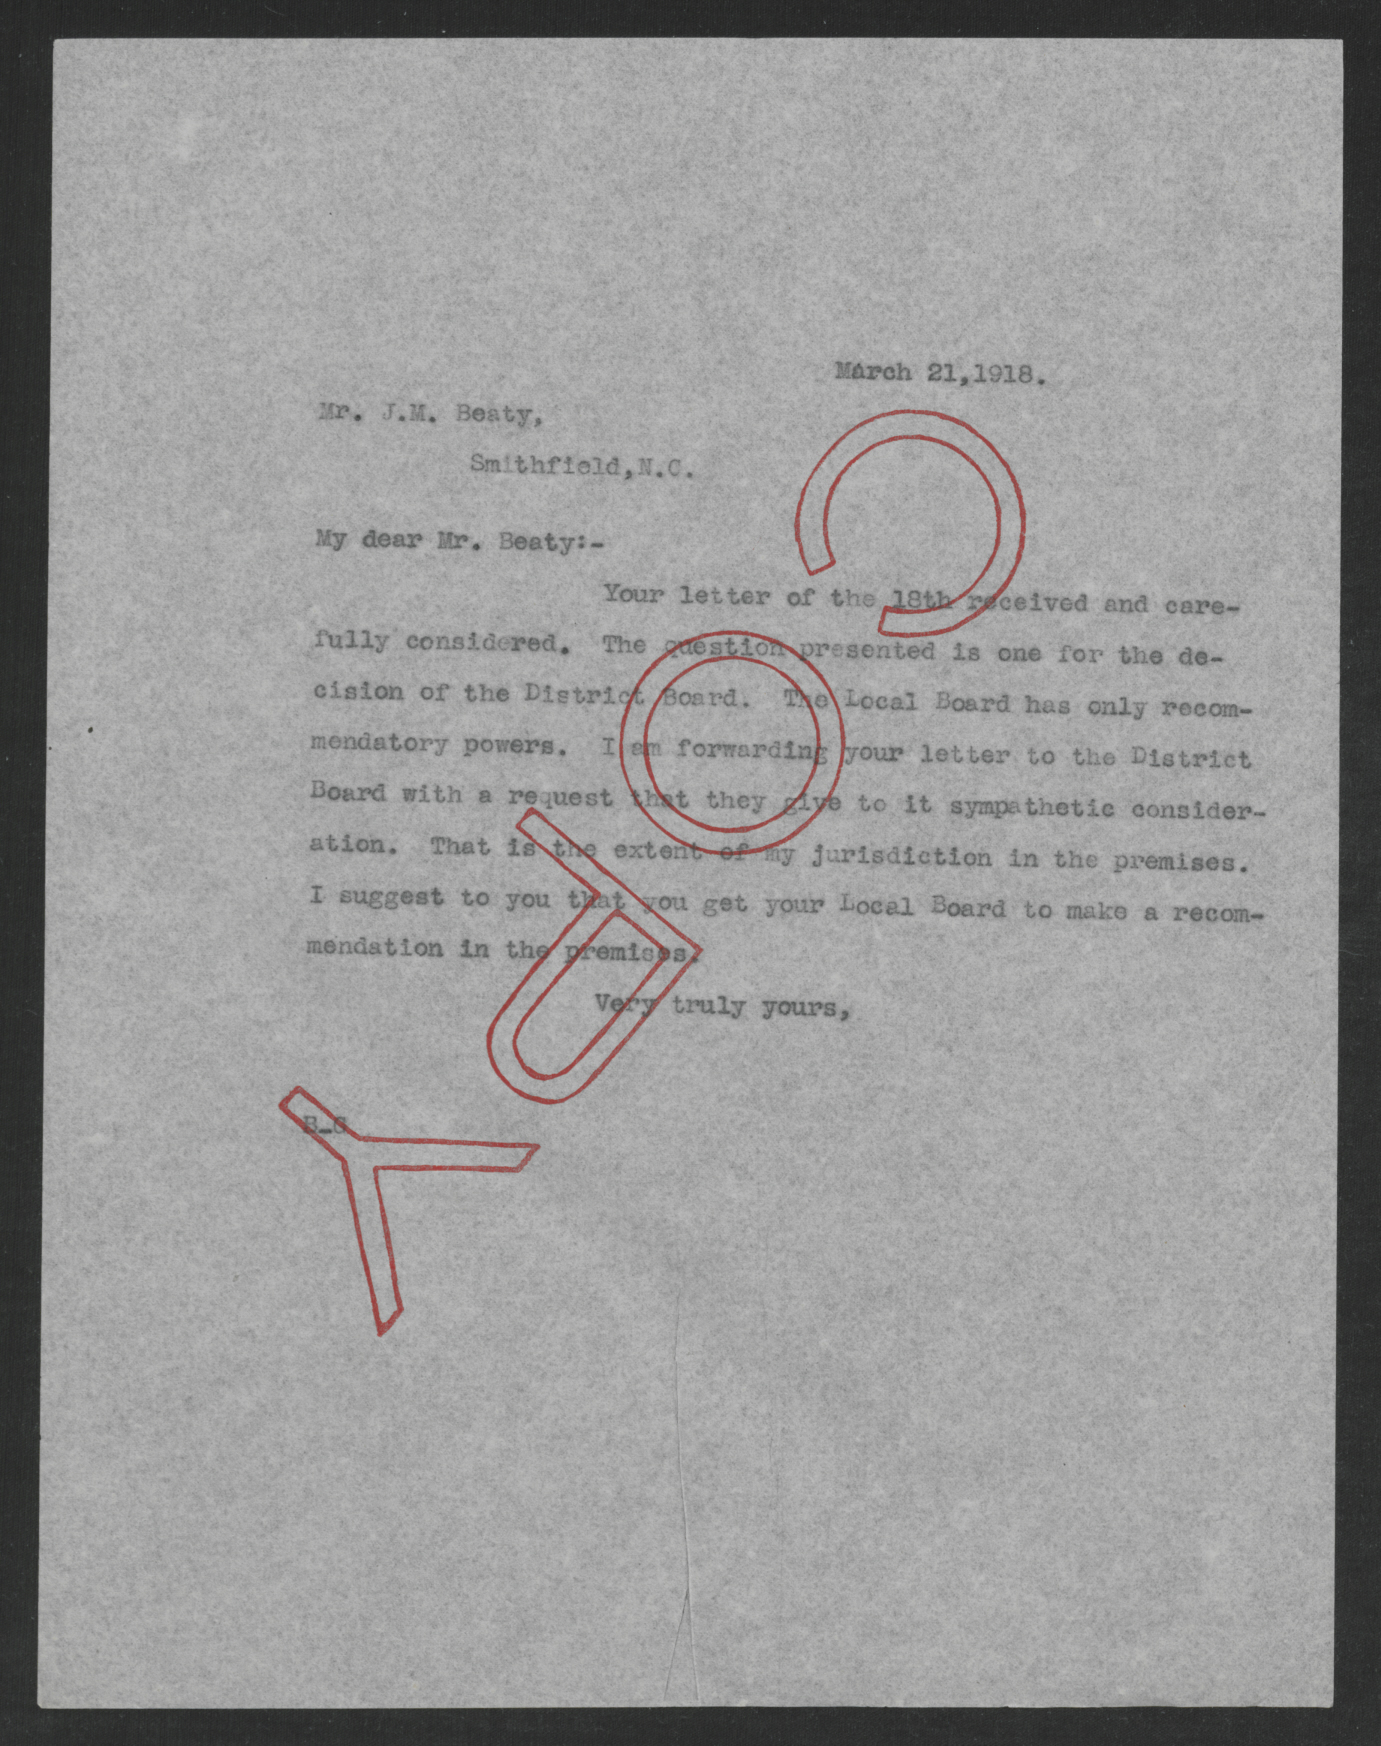 Letter from Thomas W. Bickett to James M. Beaty, March 21, 1918